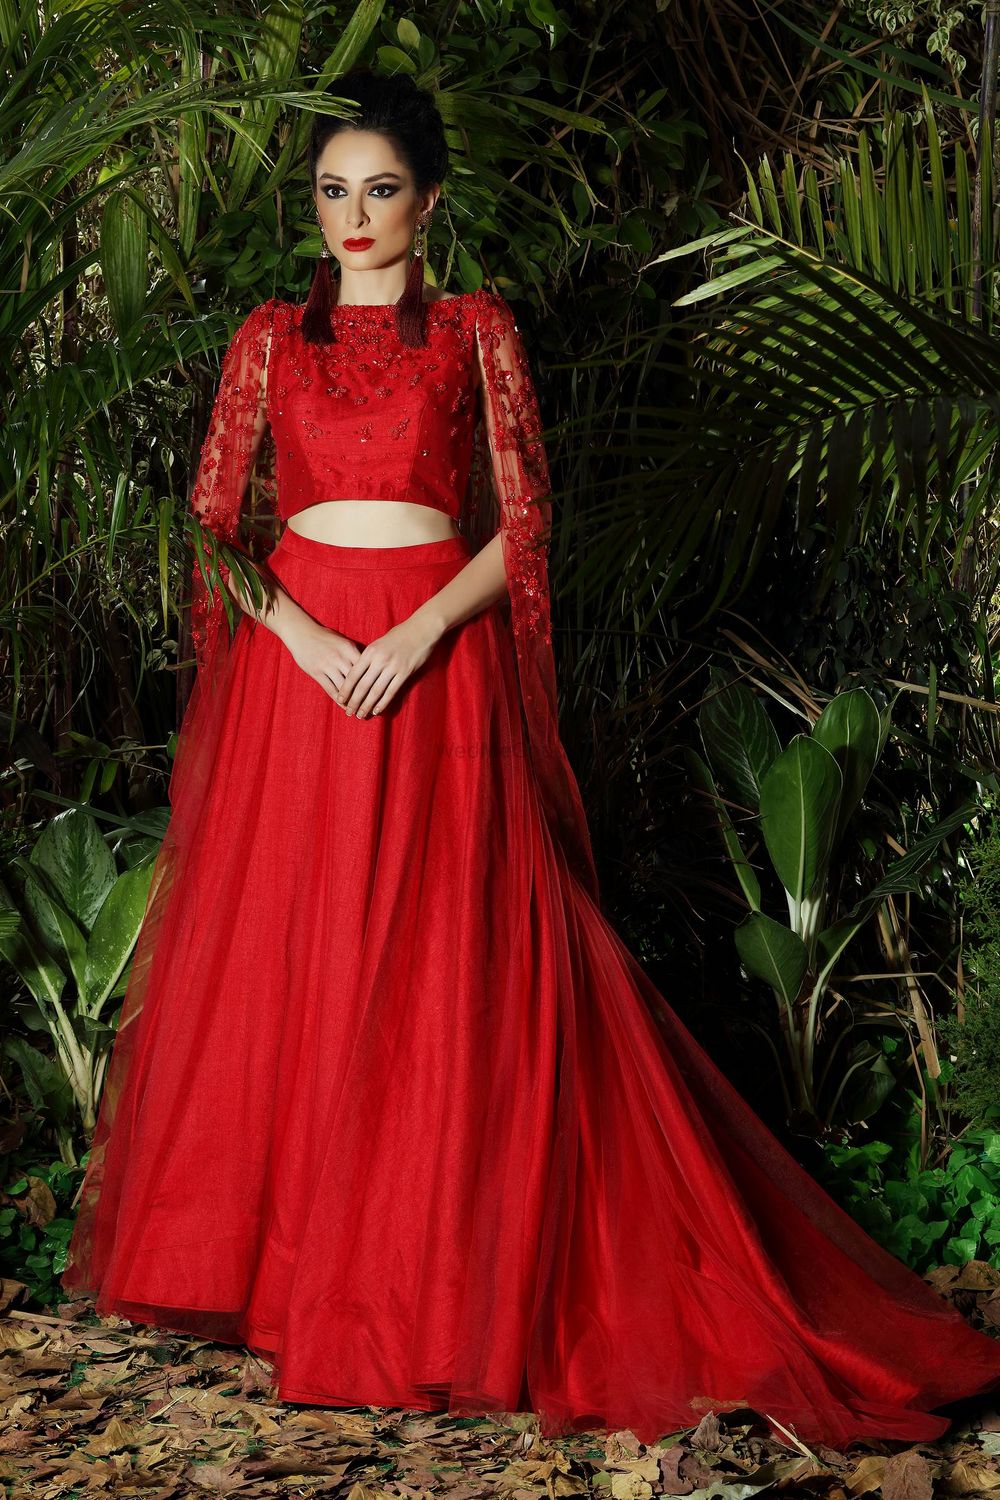 Photo of Bright red modern lehenga with lace cape and train